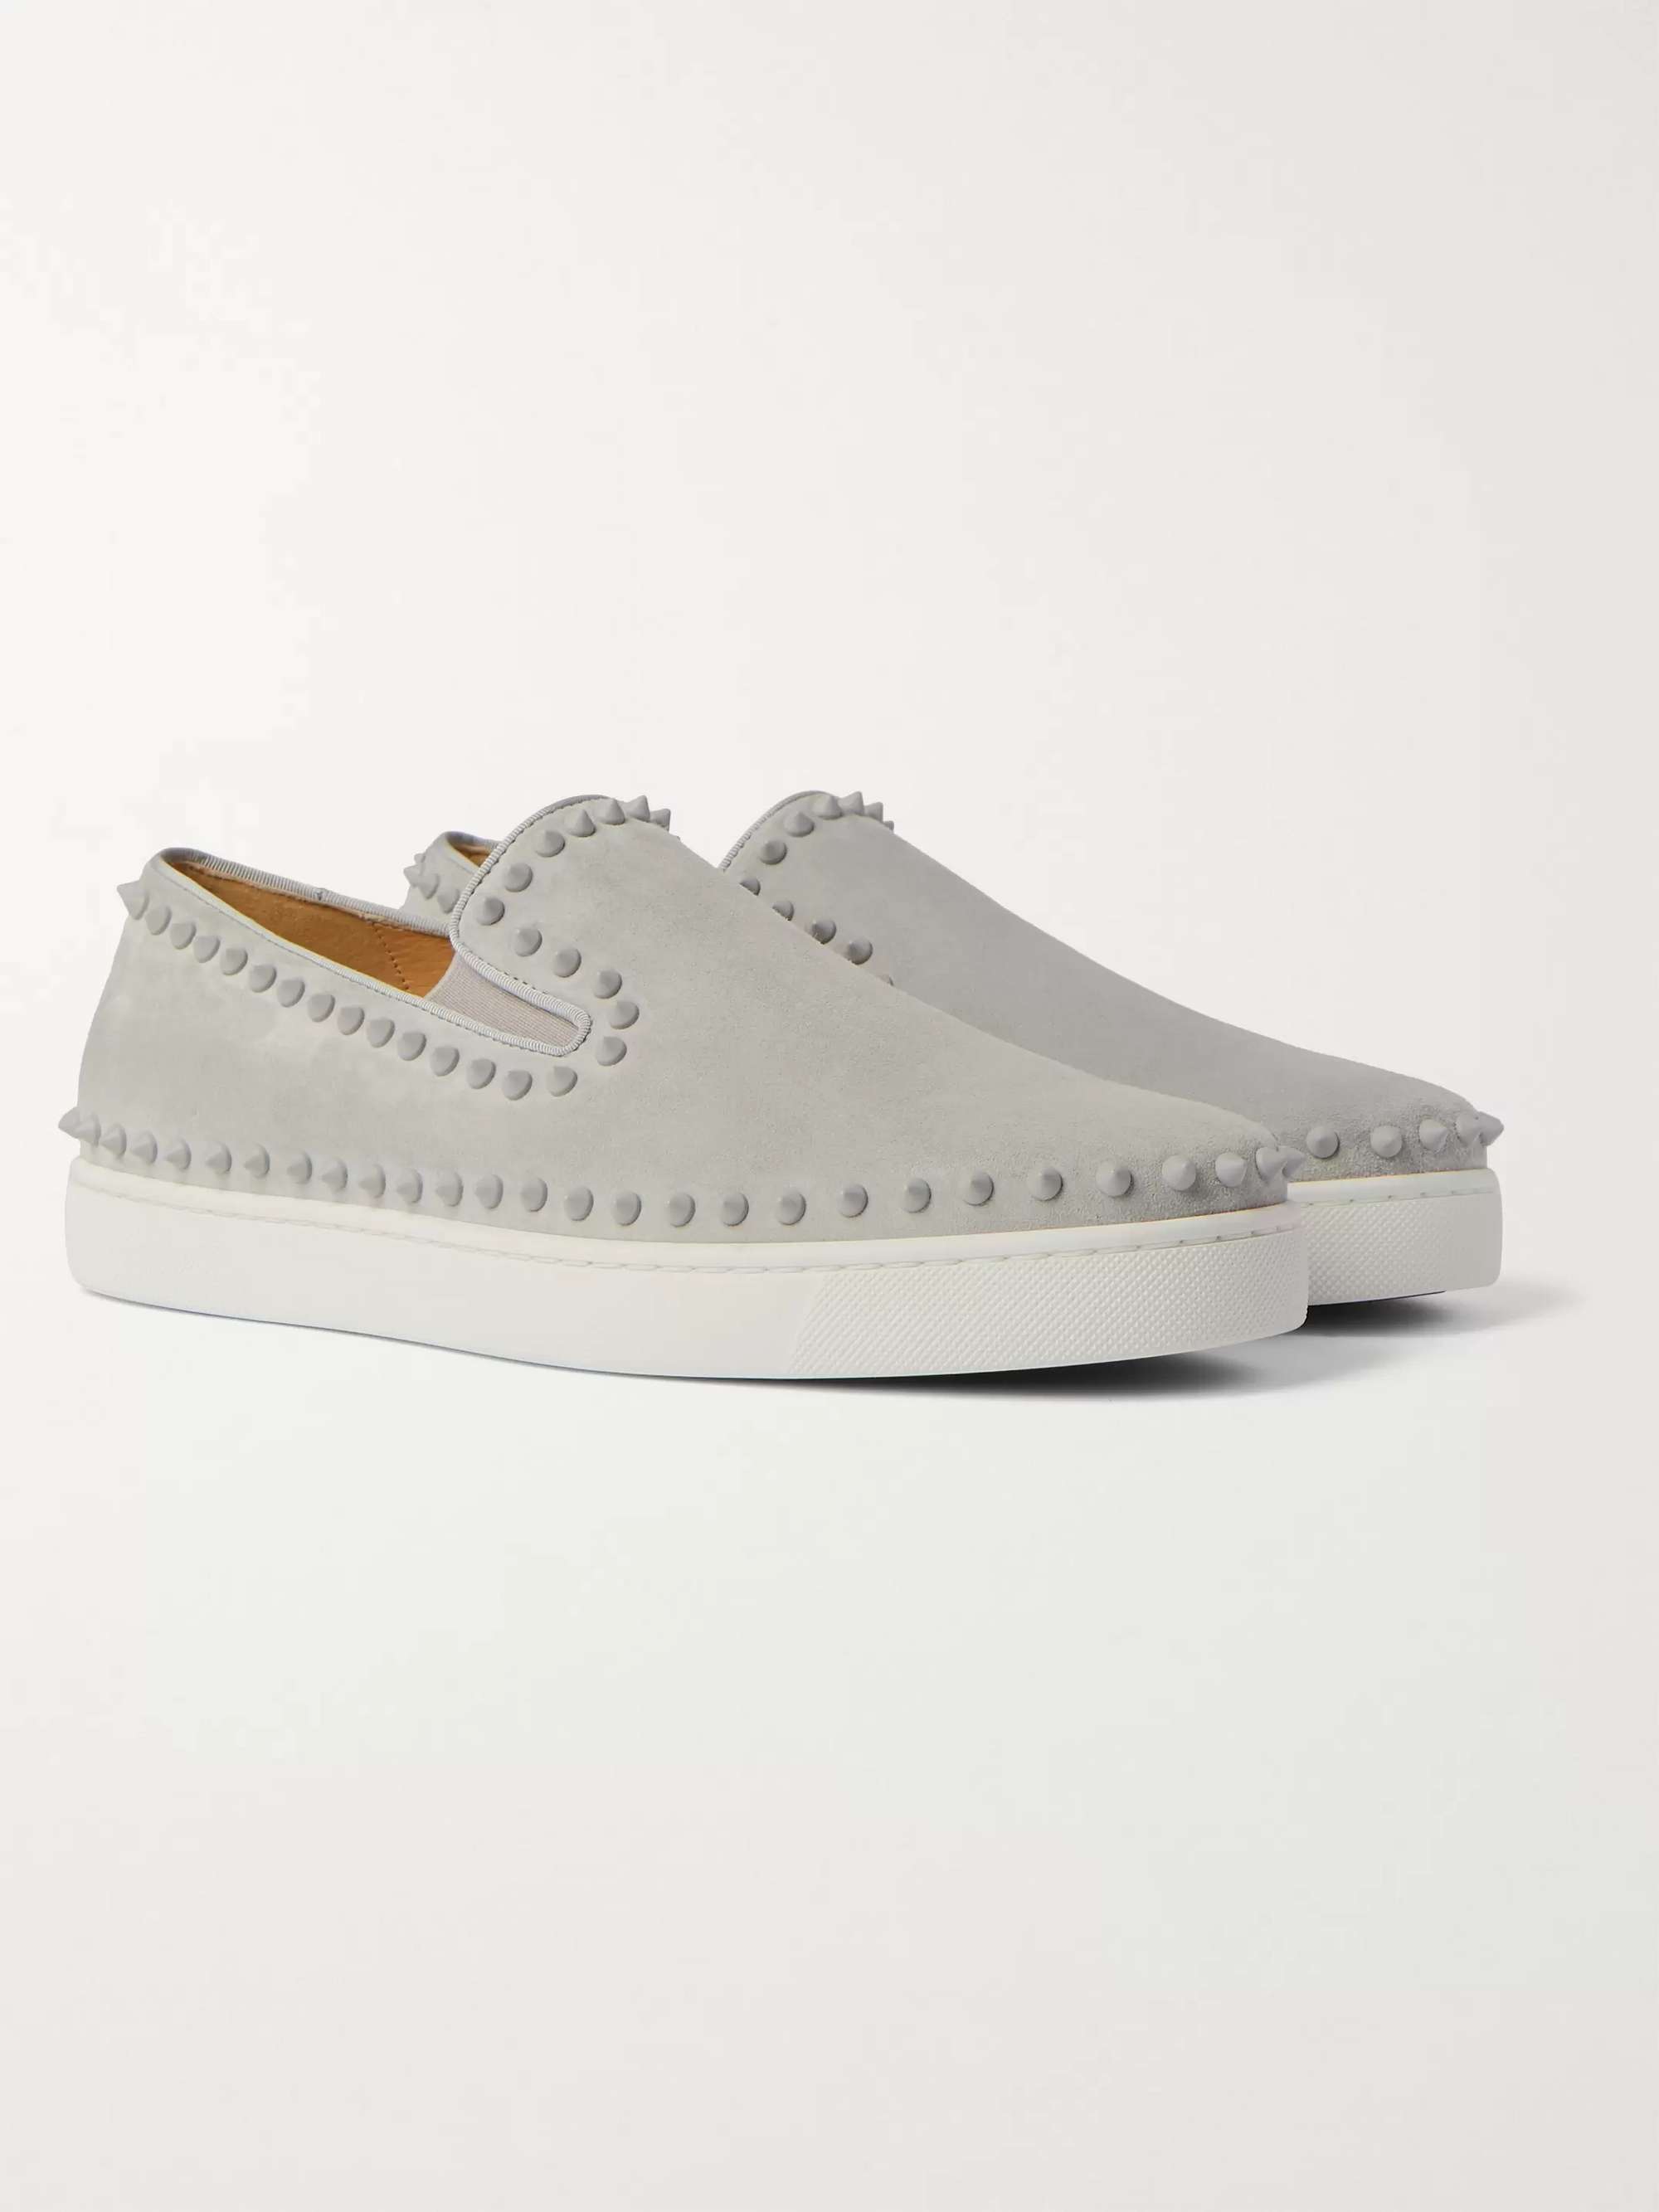 CHRISTIAN LOUBOUTIN Pik Boat Studded Suede Slip-On Sneakers